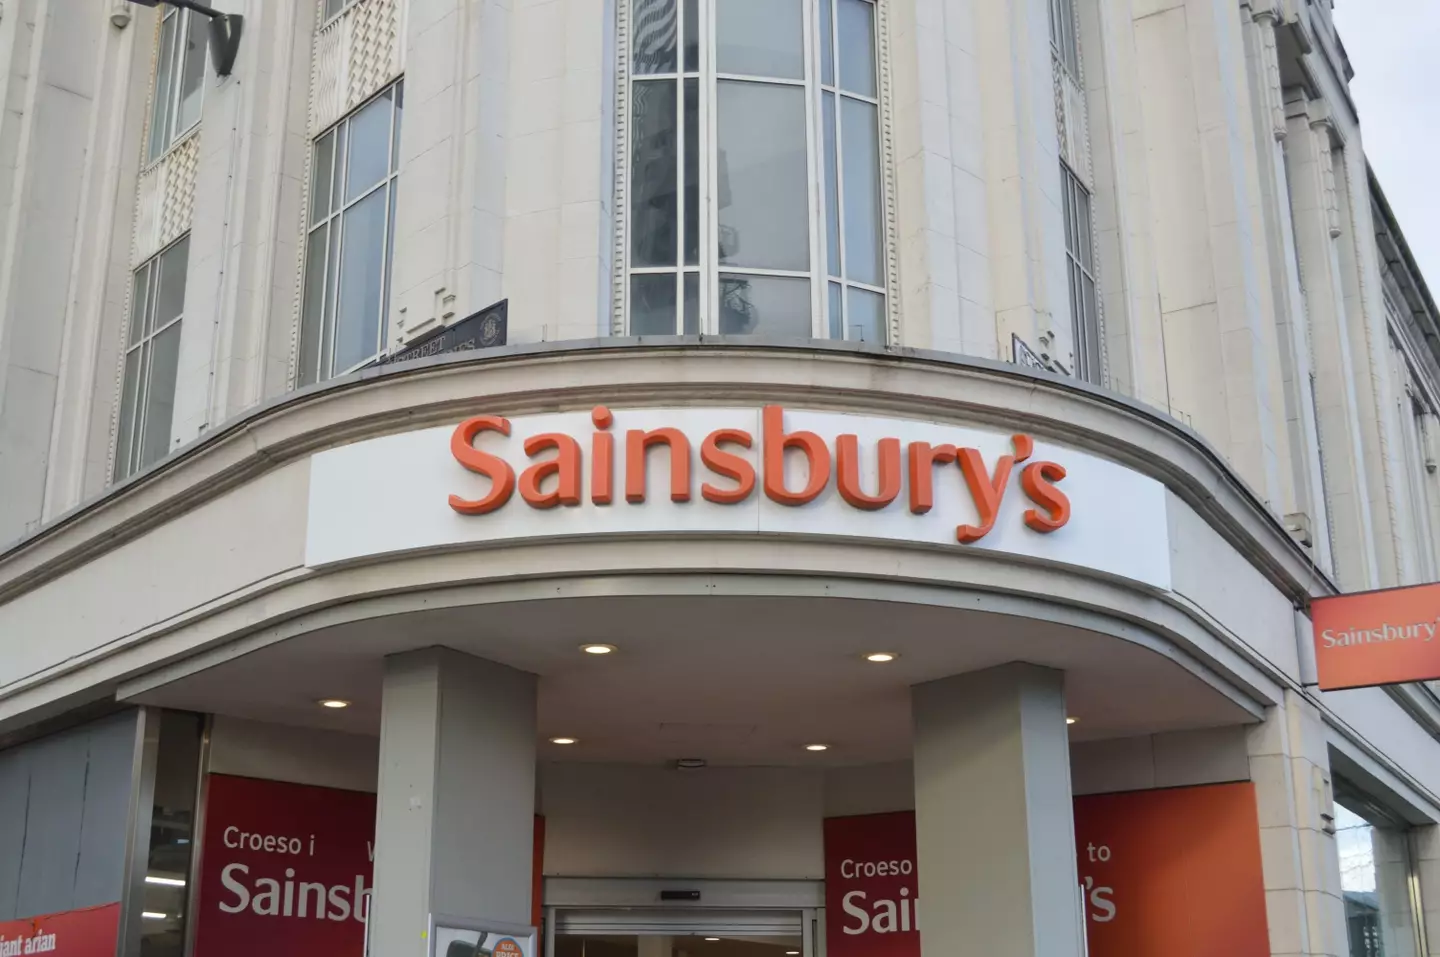 You'll be able to buy Prime in Sainsbury's from next week.